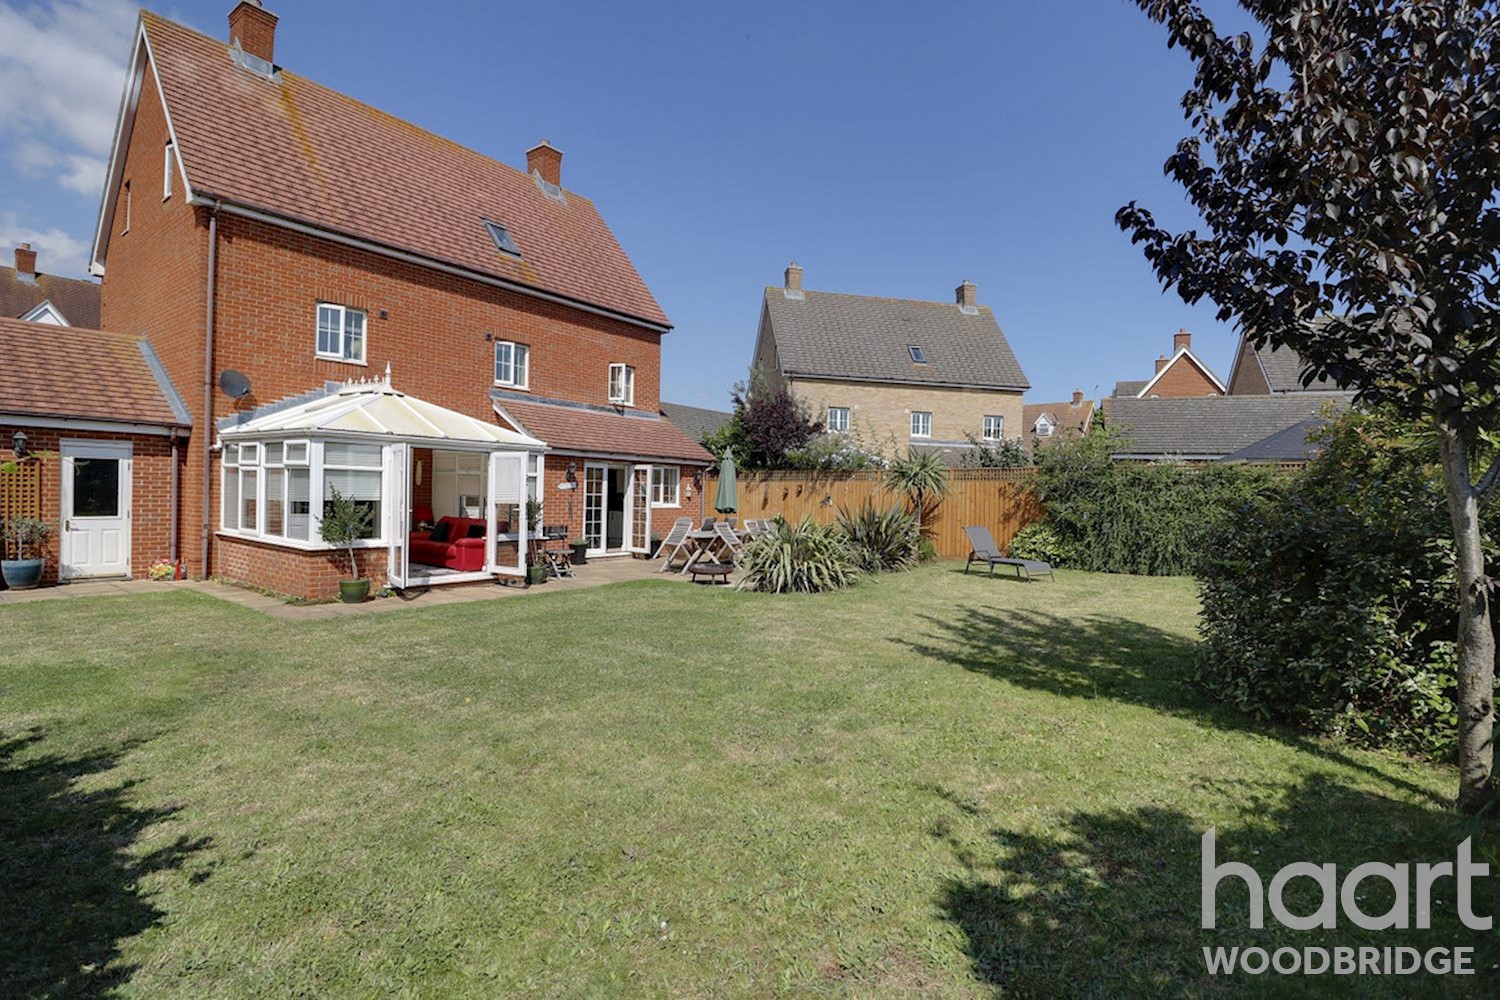 This Spacious Five Bedroom Detached Home In Rendlesham Has Been Well Loved By It S Current Owners And Is Just Waiting For The Next Family To Move In A